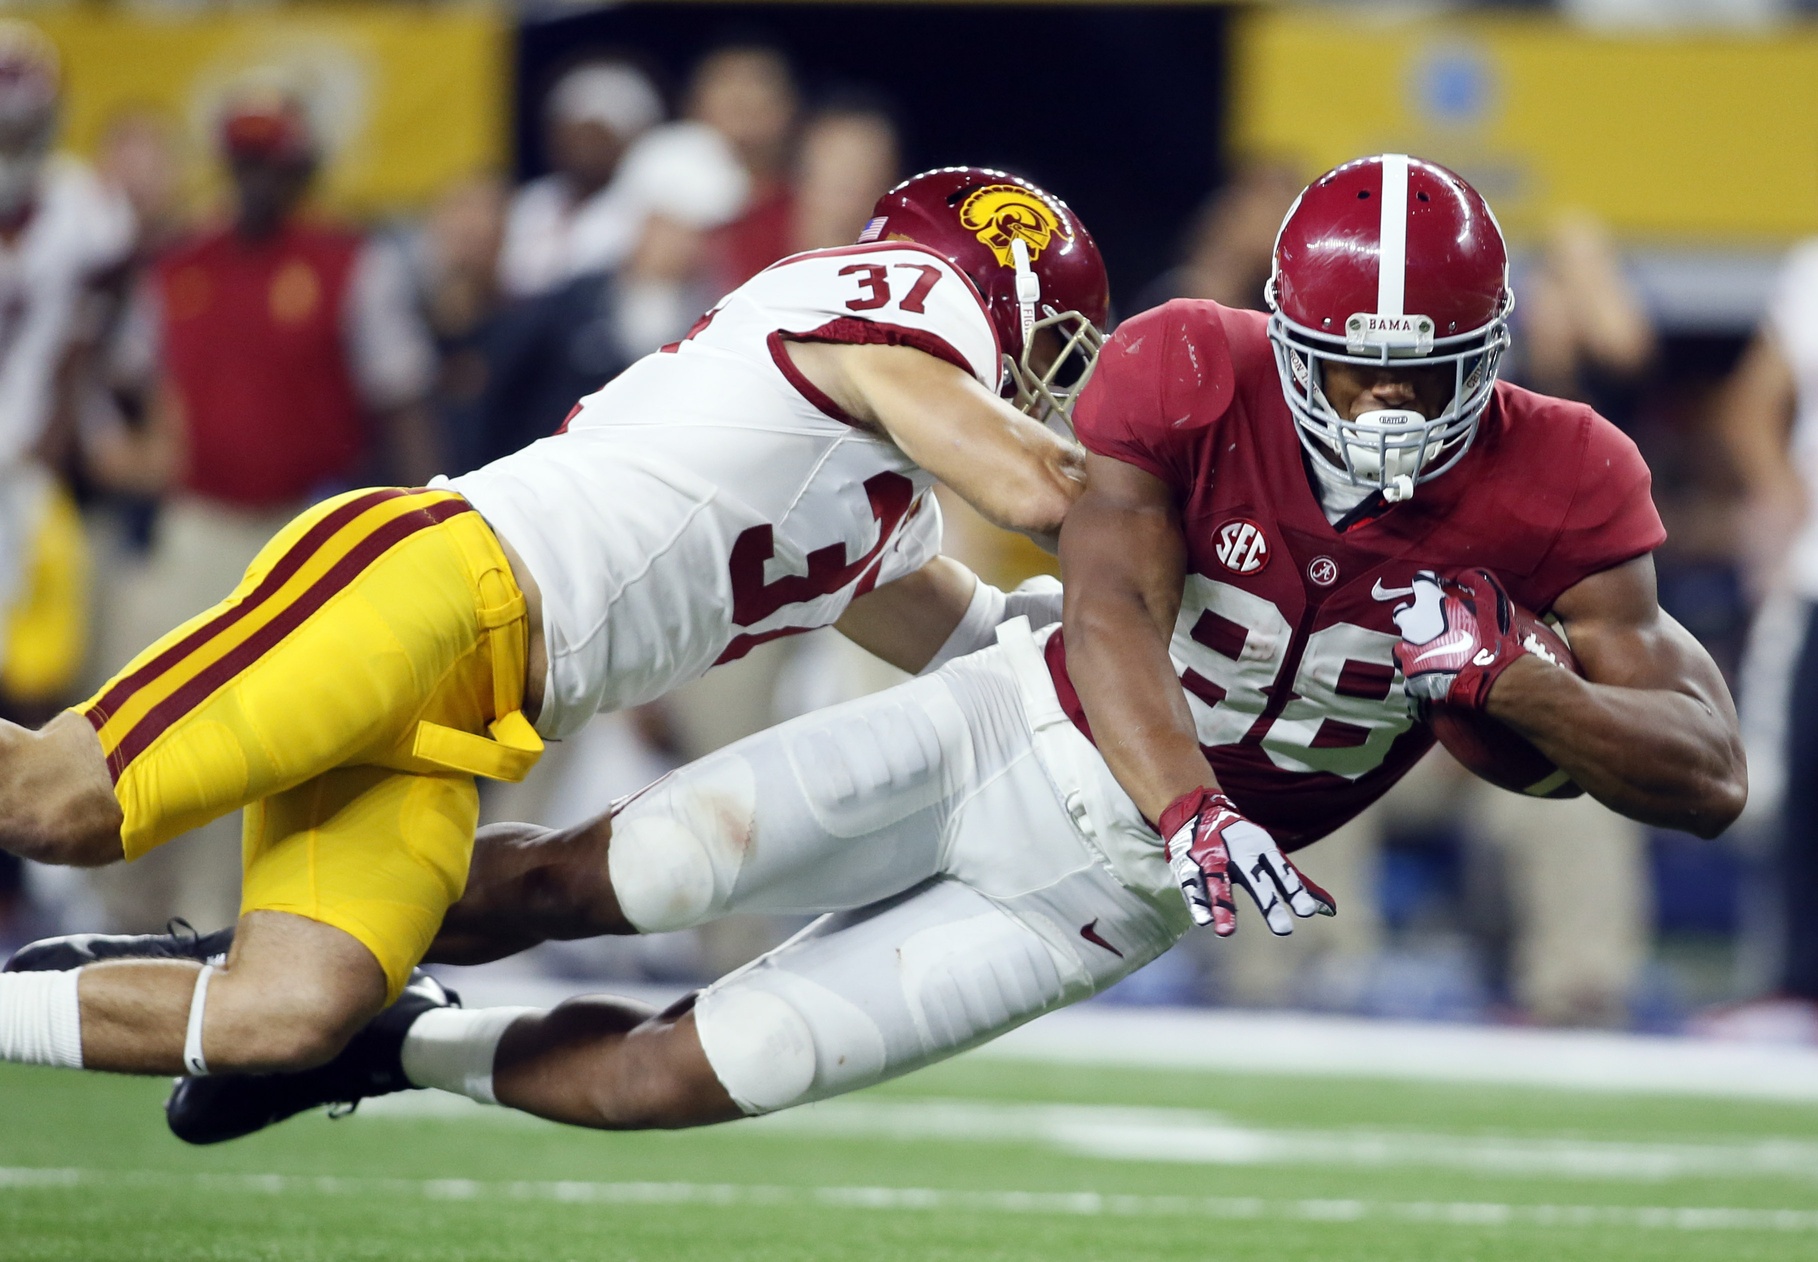 Sep 3, 2016; Arlington, TX, USA; Alabama Crimson Tide tight end O.J. Howard (88) catches the ball as USC Trojans defensive back Matt Lopes (37) defends during the second half at AT&T Stadium. Mandatory Credit: Tim Heitman-USA TODAY Sports